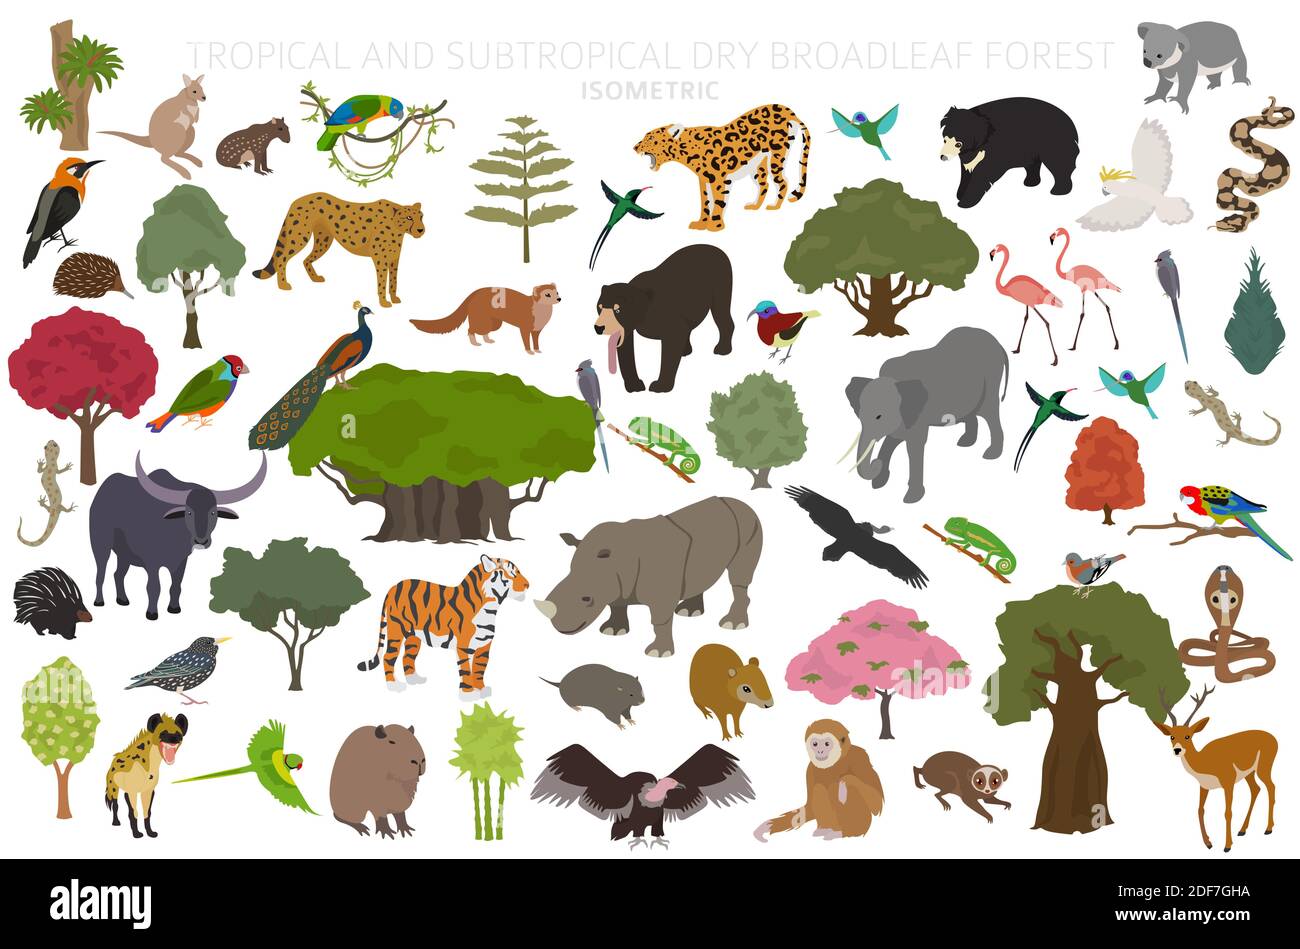 Tropical and subtropical dry broadleaf forest biome, natural region infographic. Seasonal forests. Animals, birds and vegetations ecosystem isometric Stock Vector